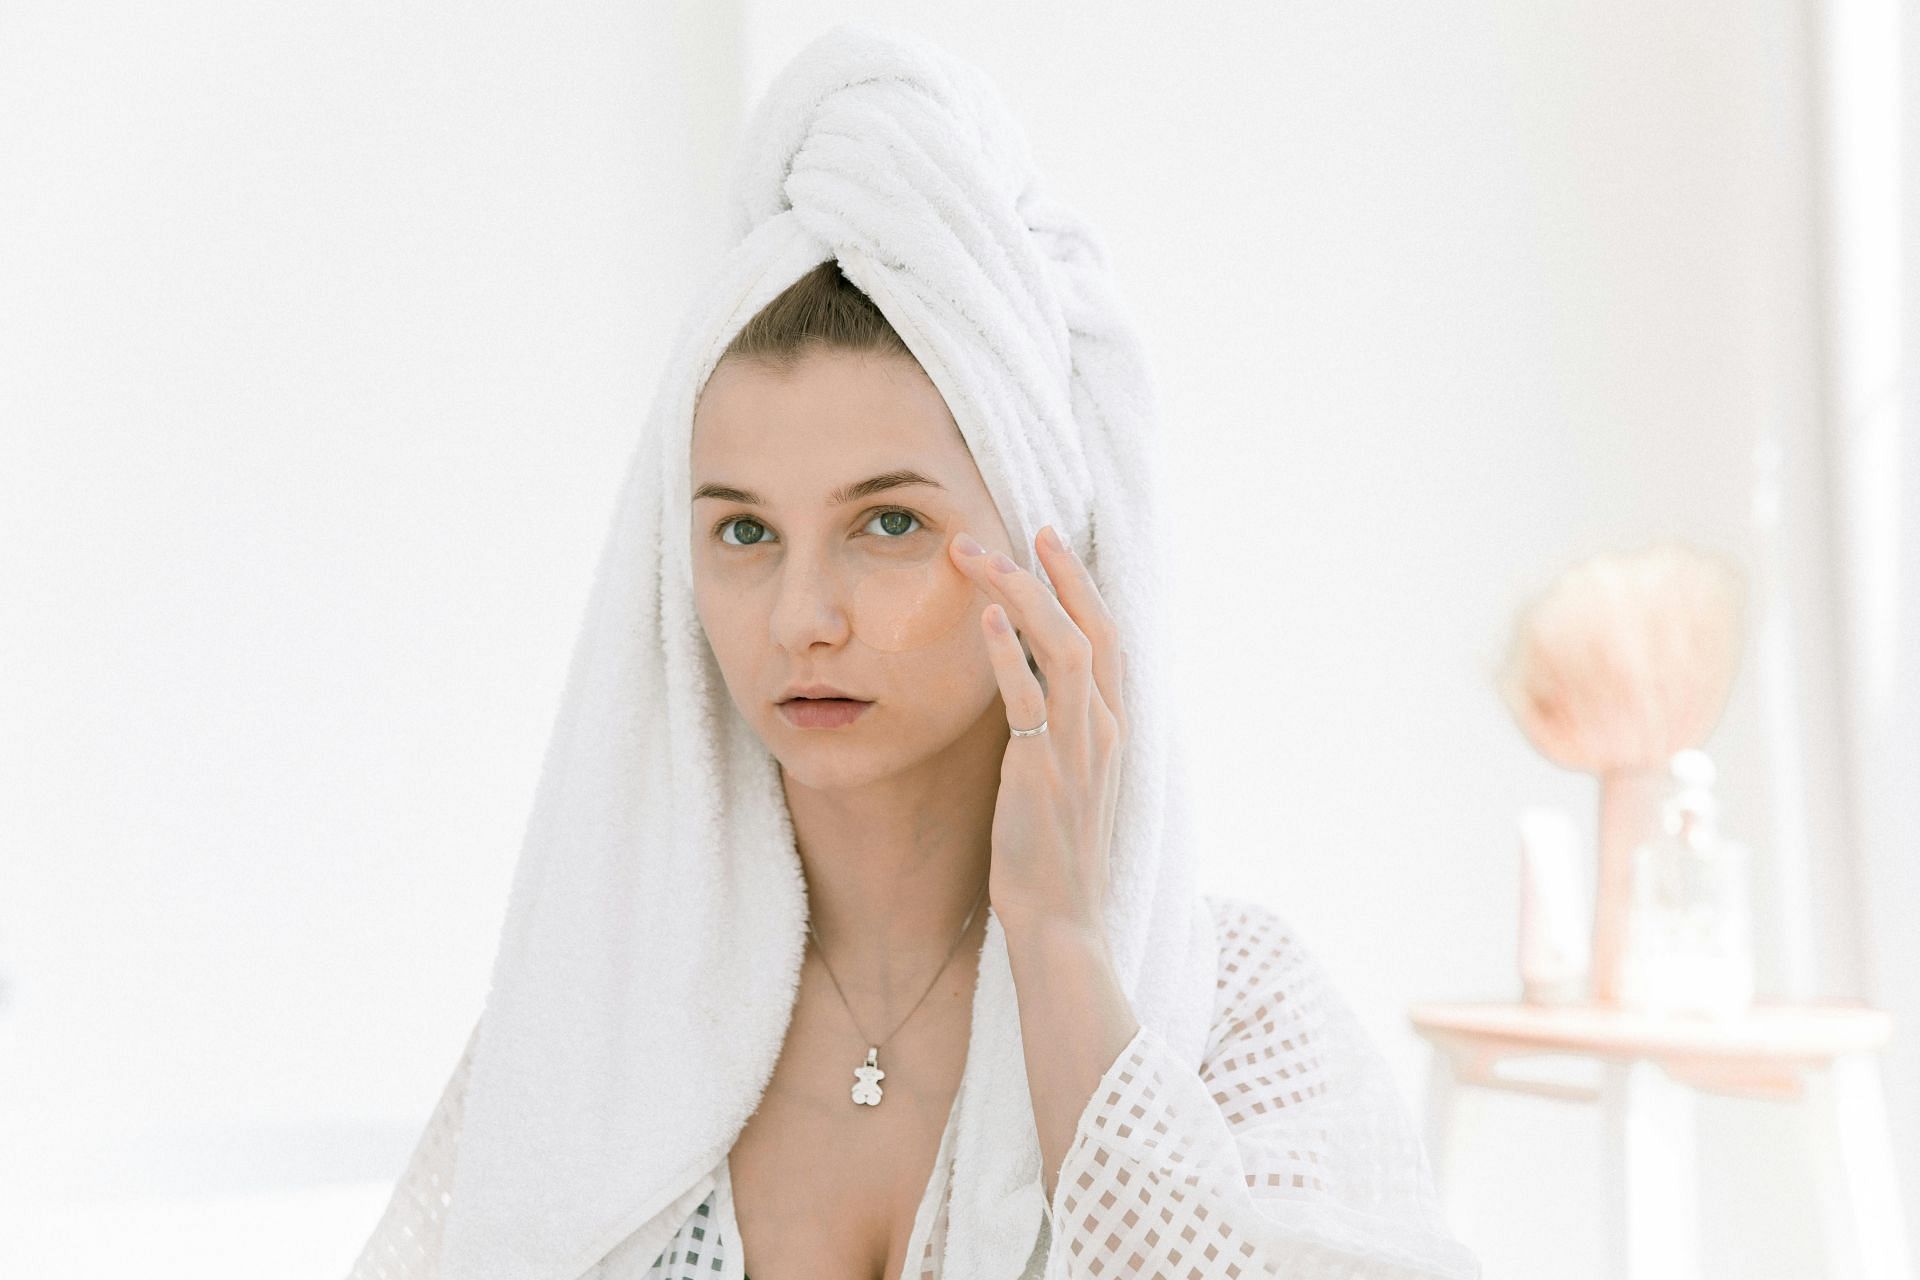 8 ways to remove unwanted hair at home (image sourced via Pexels / Photo by katrin)